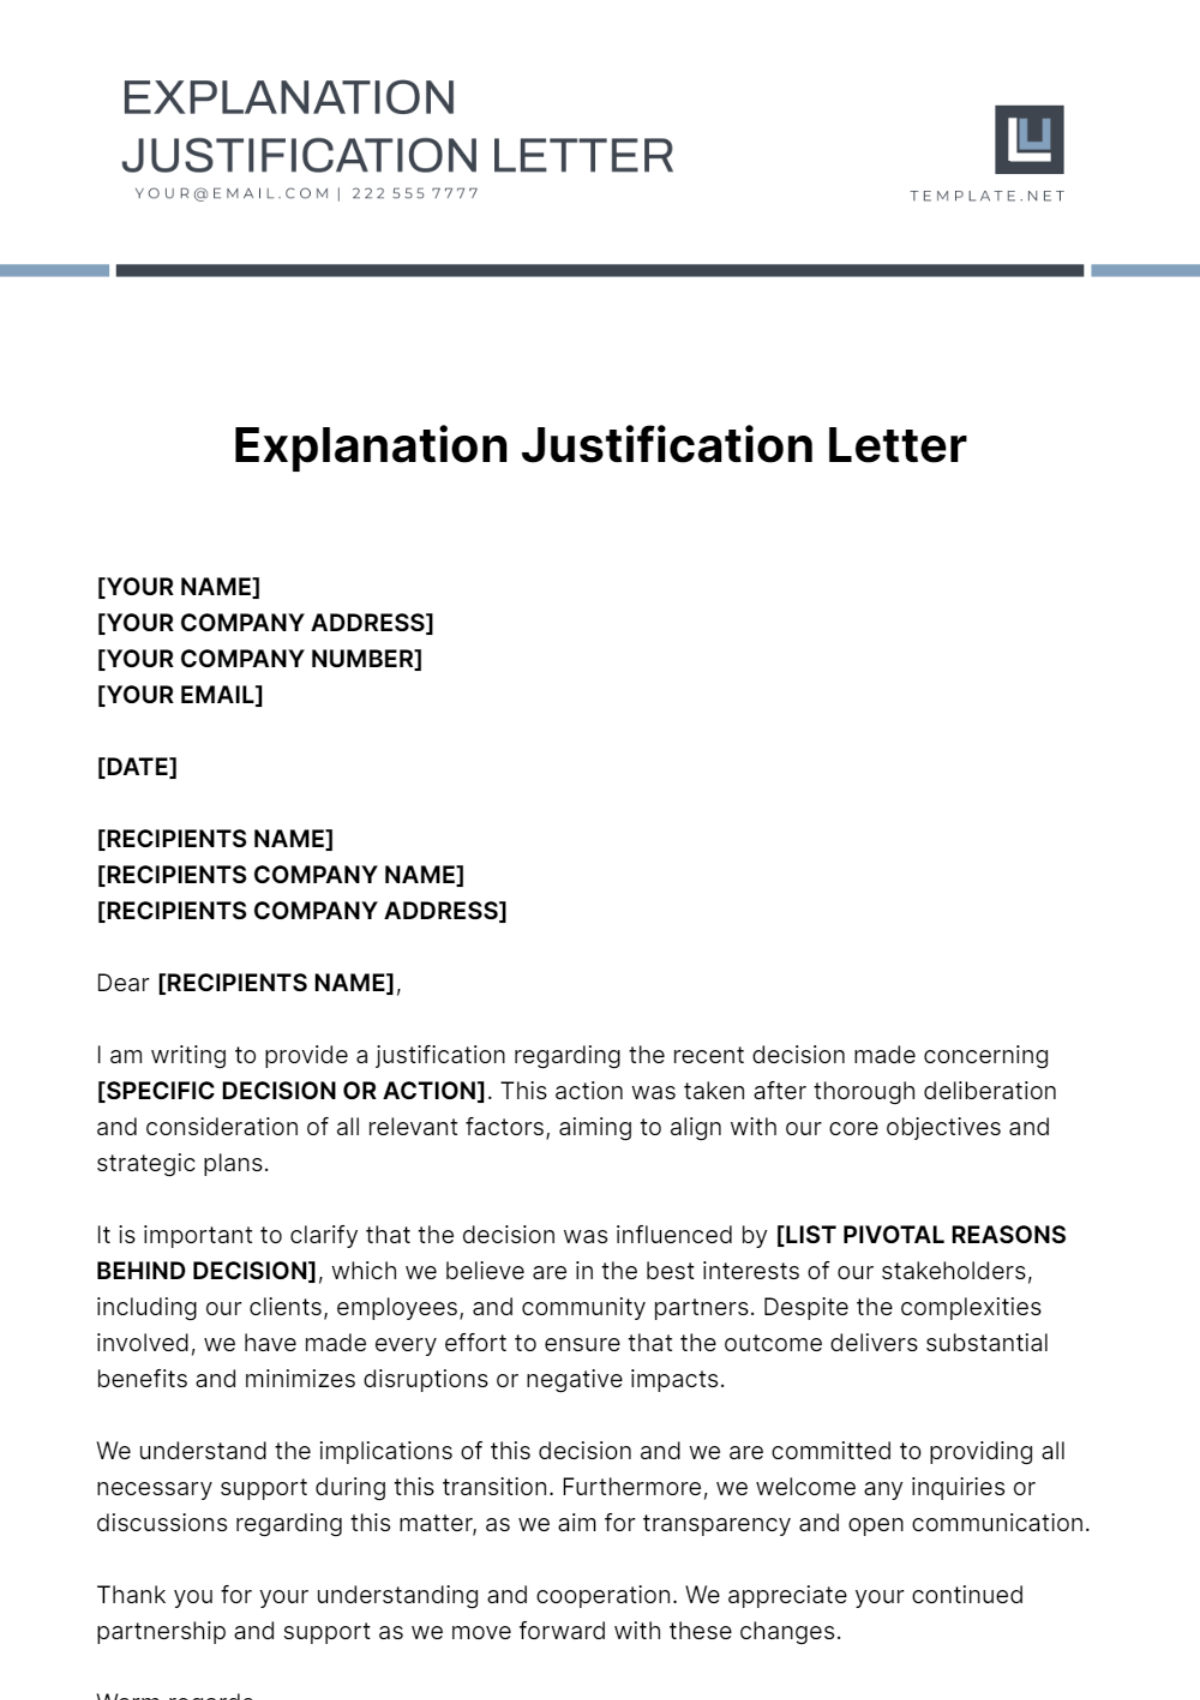 Explanation Justification Letter Template